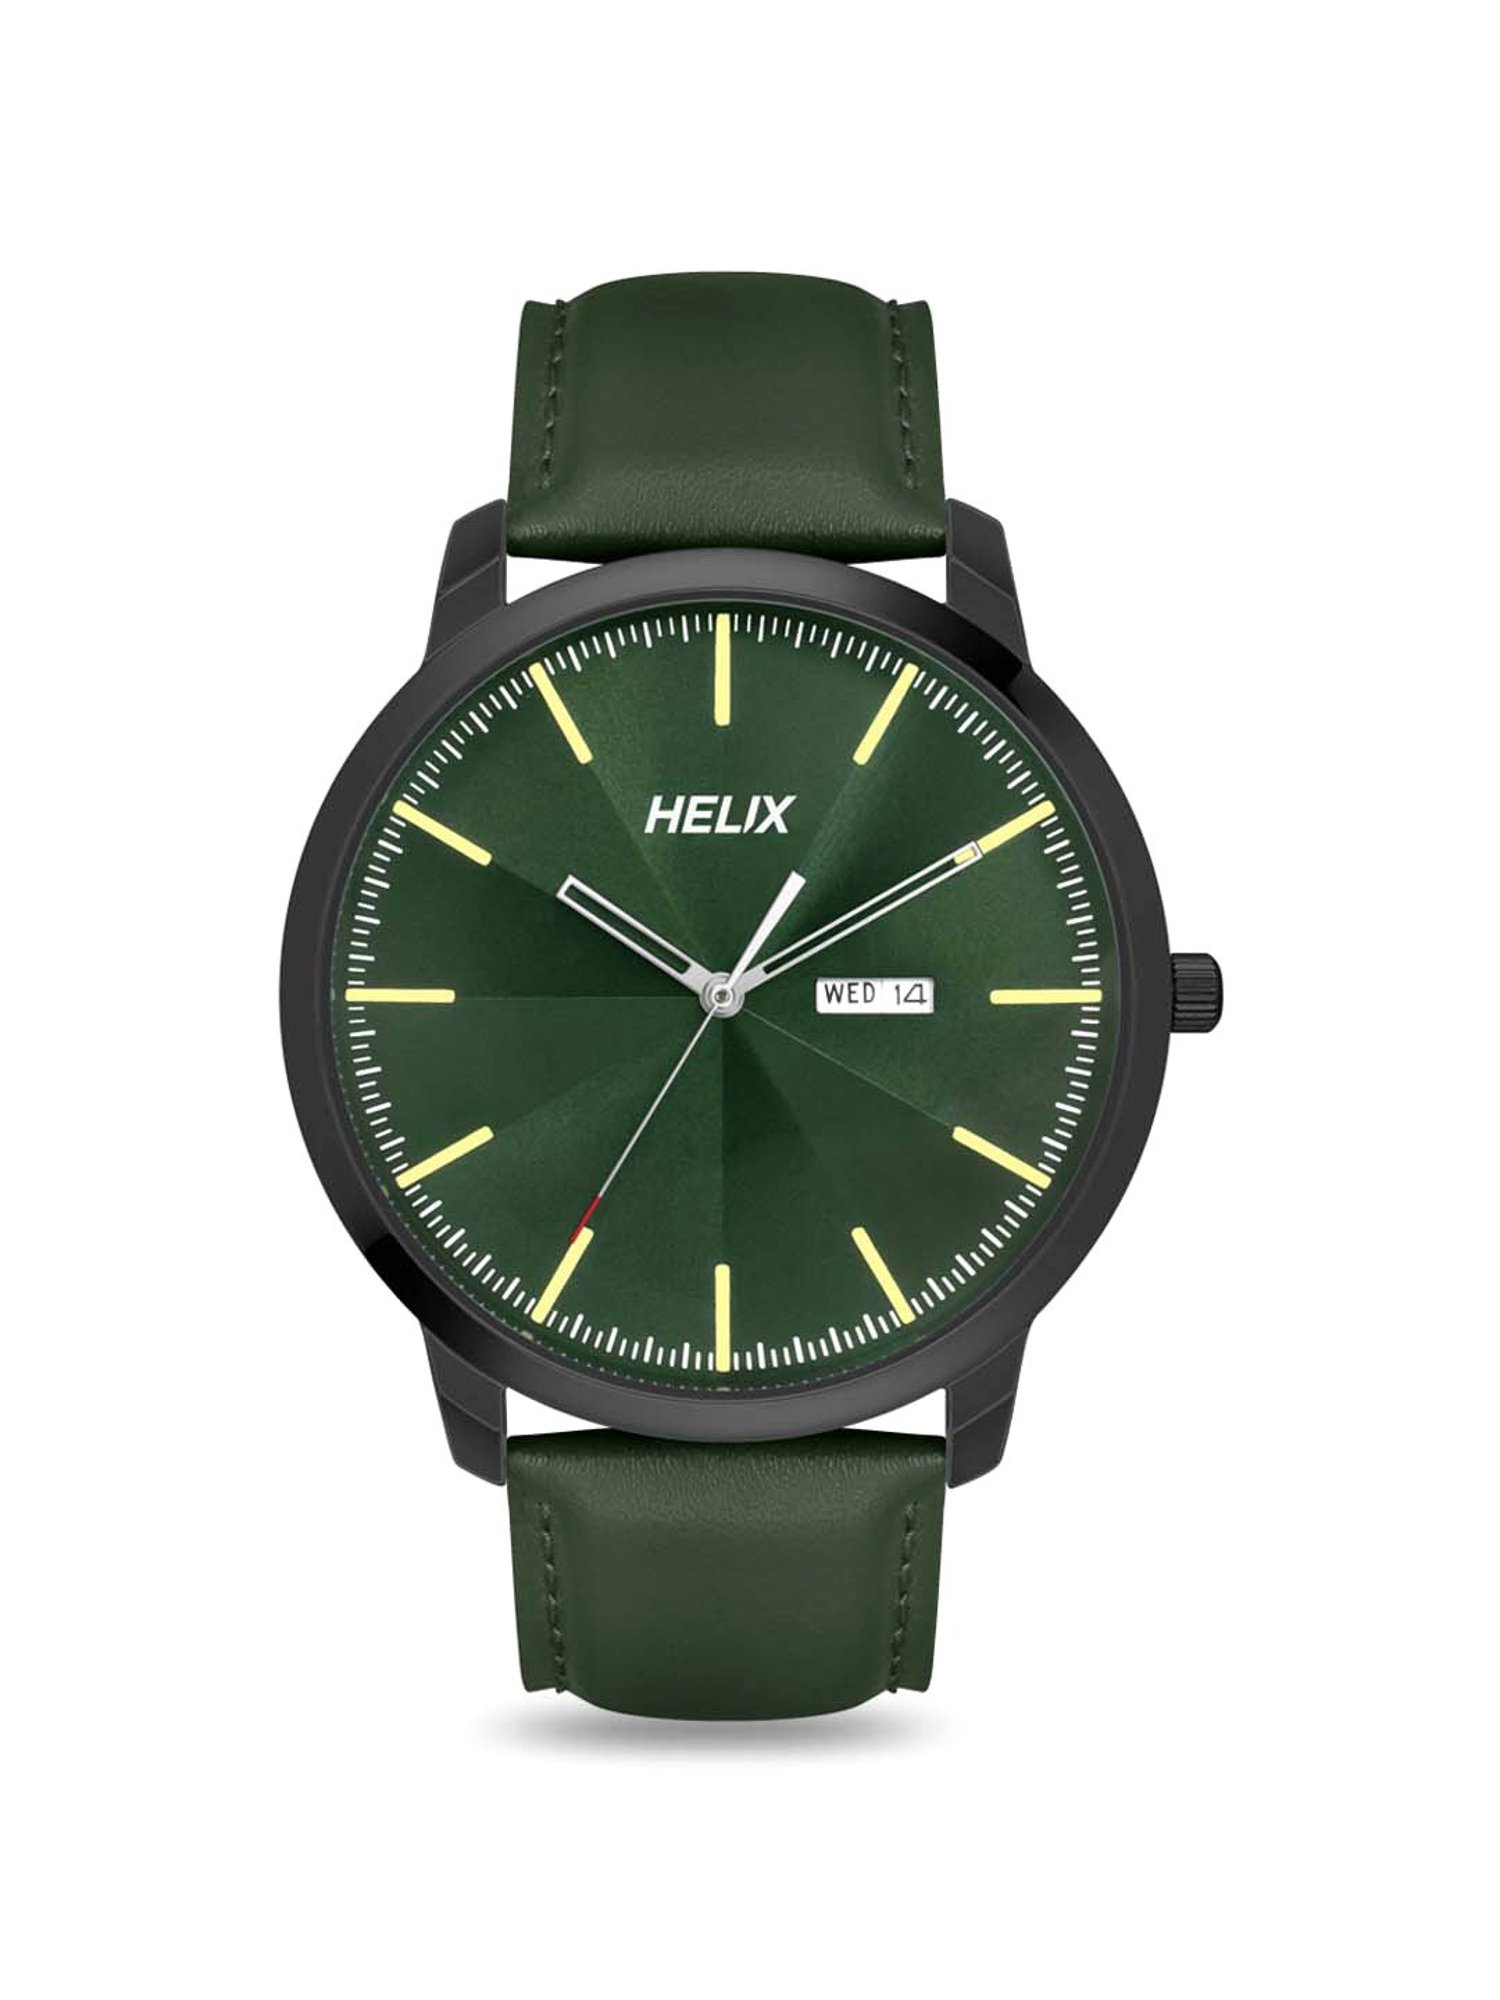 Helix Analog Watch - For Women - Buy Helix Analog Watch - For Women  TW032HL42 Online at Best Prices in India | Flipkart.com